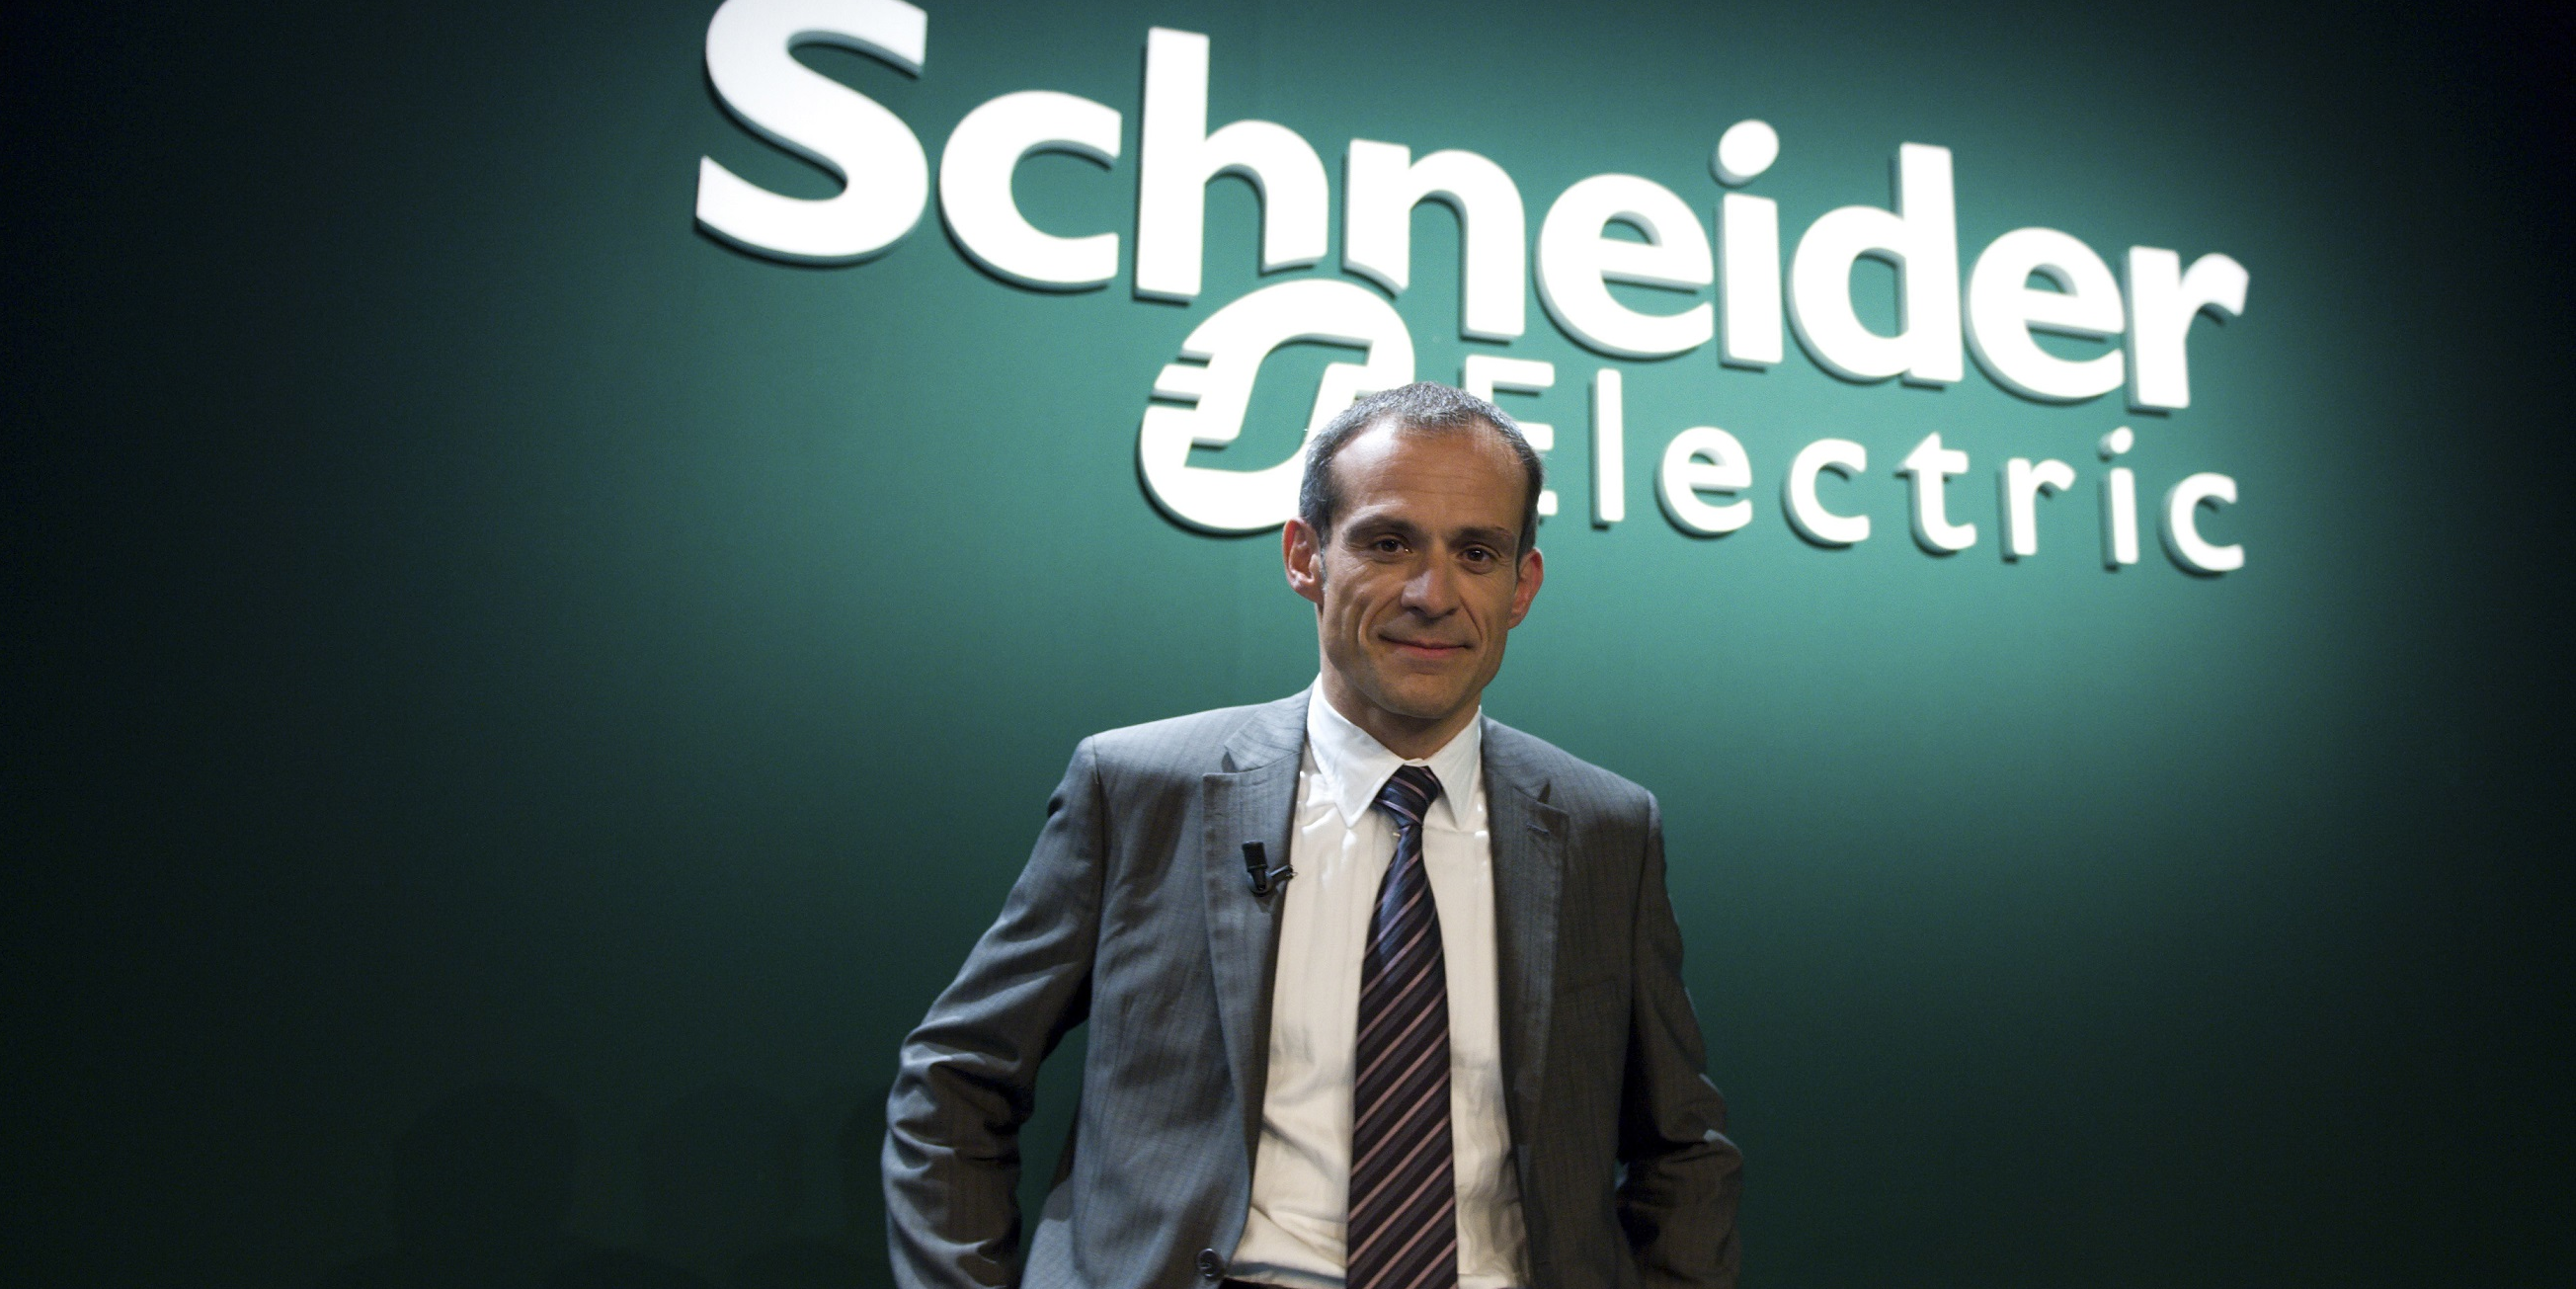 https://img6.s3wfg.com/web/img/images_uploaded/8/b/jean-pascal-tricoire-schneider-electric.png